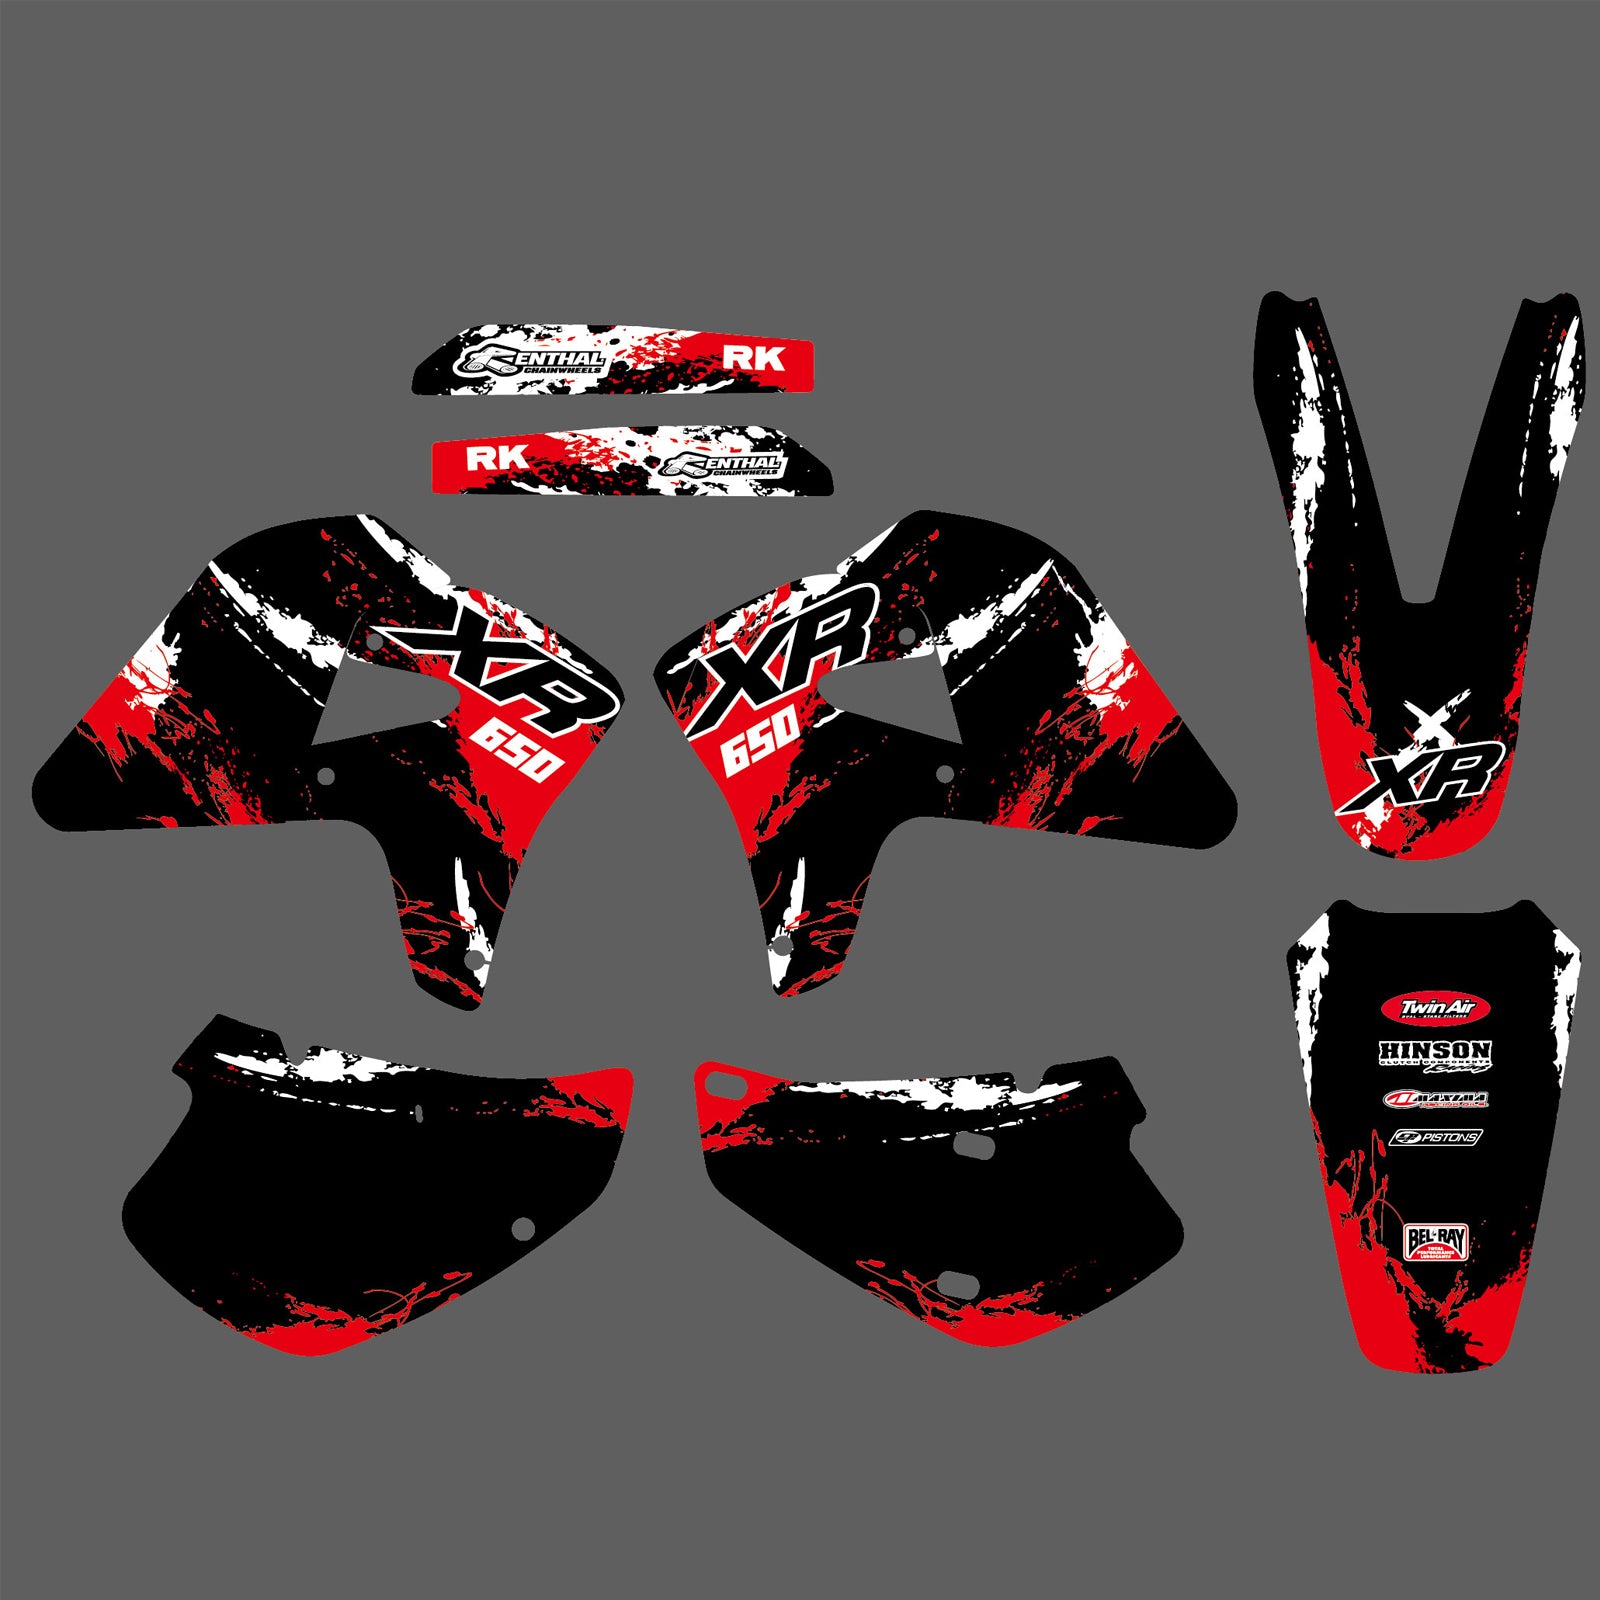 Team Graphics Decals Stickers For Honda XR650R 2000-2008